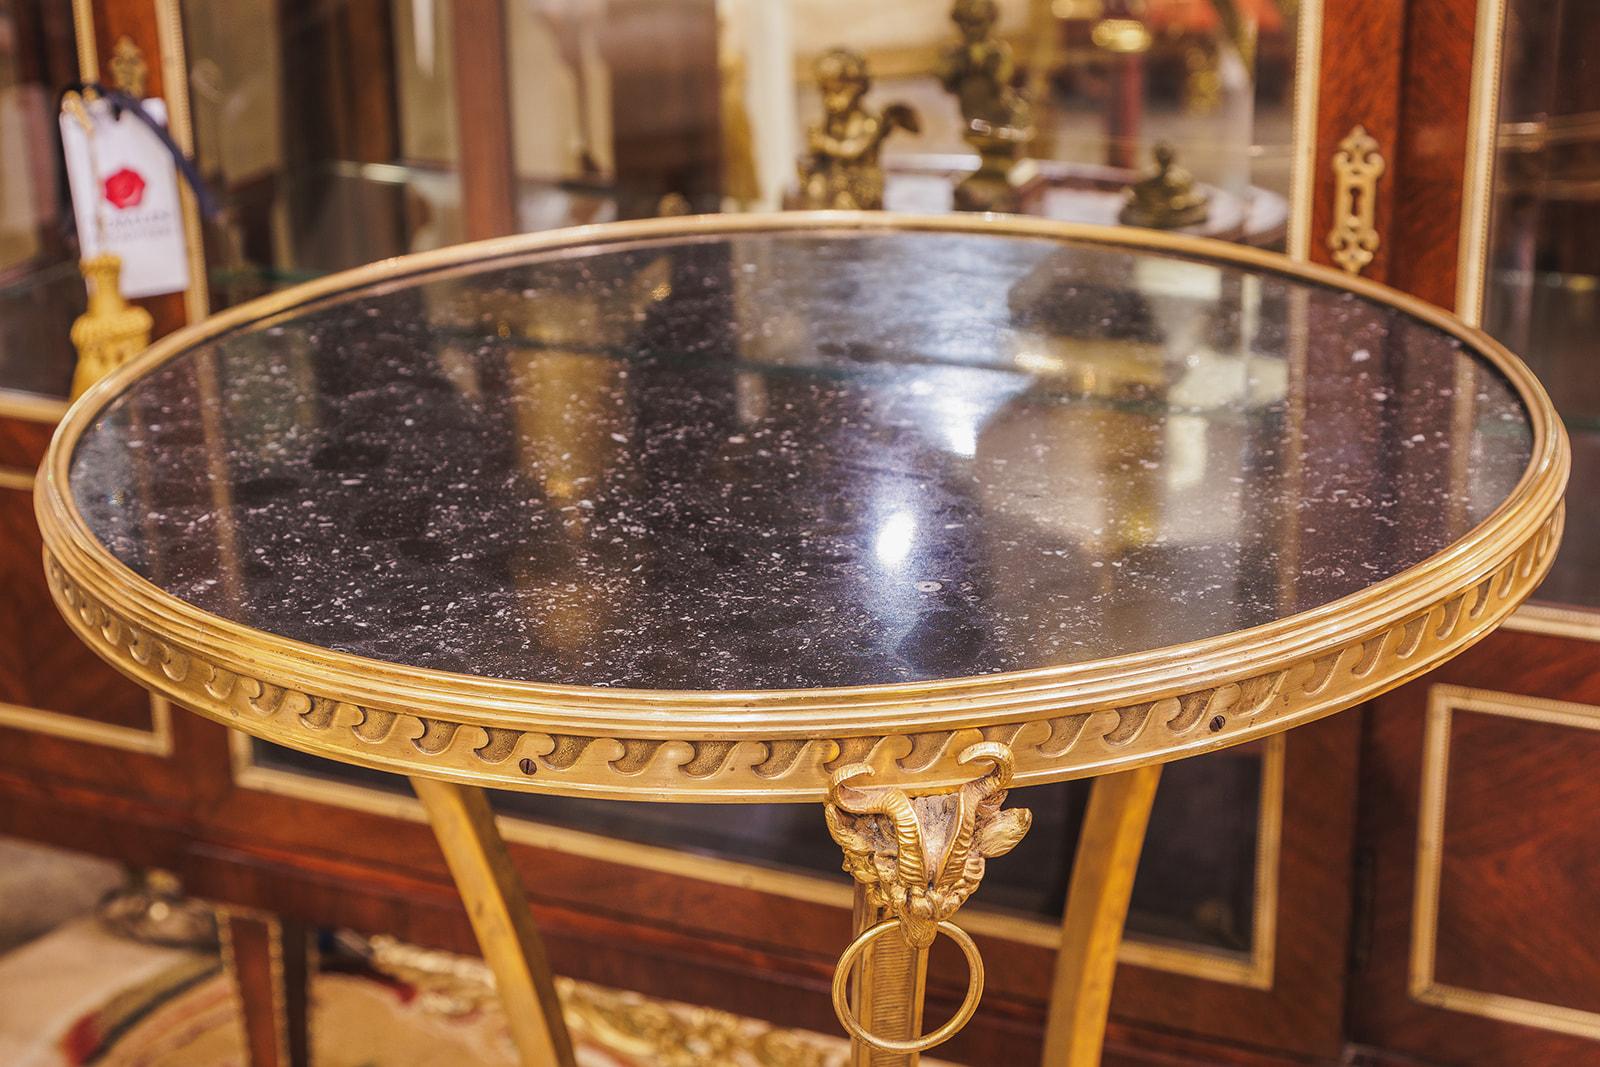 A fine pair of late 19th century French Louis XVI gilt bronze and marble top gueridon tables. Fine details and gilding . Original Belgium black marble tops 